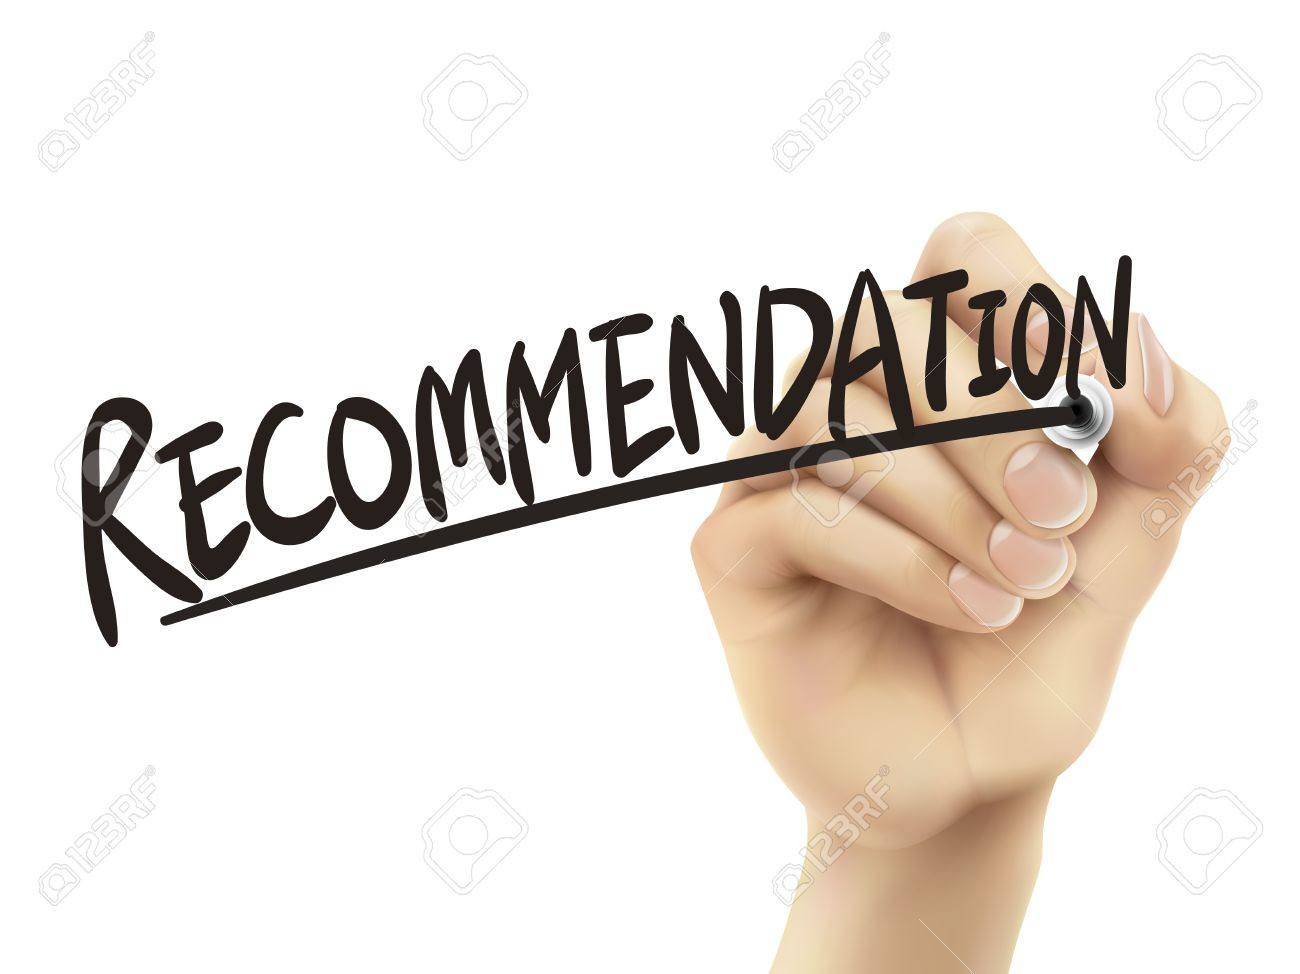 Recommendation written by hand